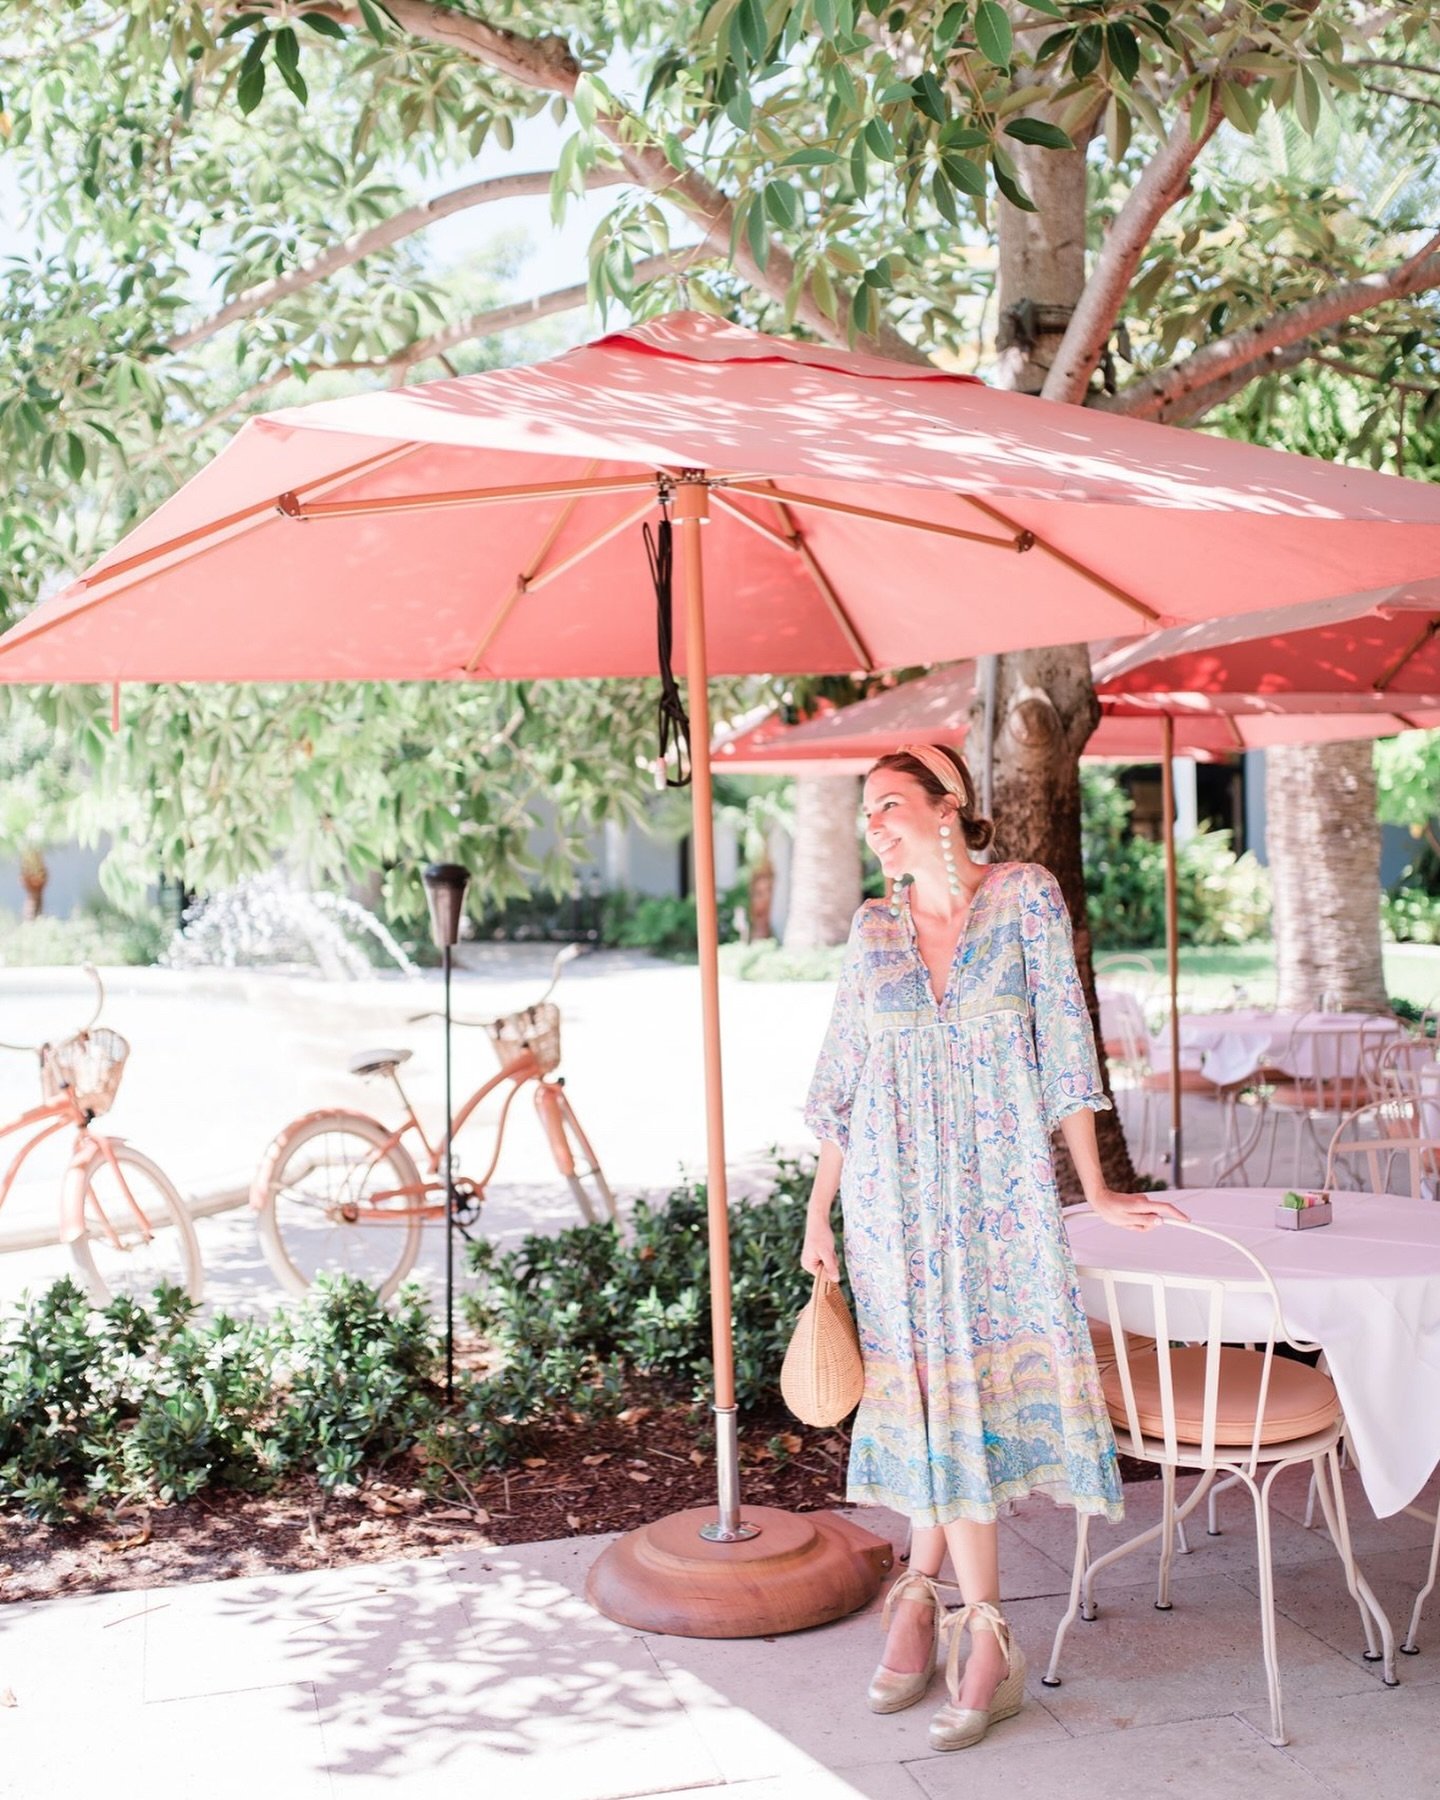 Excited to be back in one of my favorite places with a few new *must do&rsquo;s* to add to my blog post about a weekend away in Palm Beach. Stay tuned ☀️🌴🍹